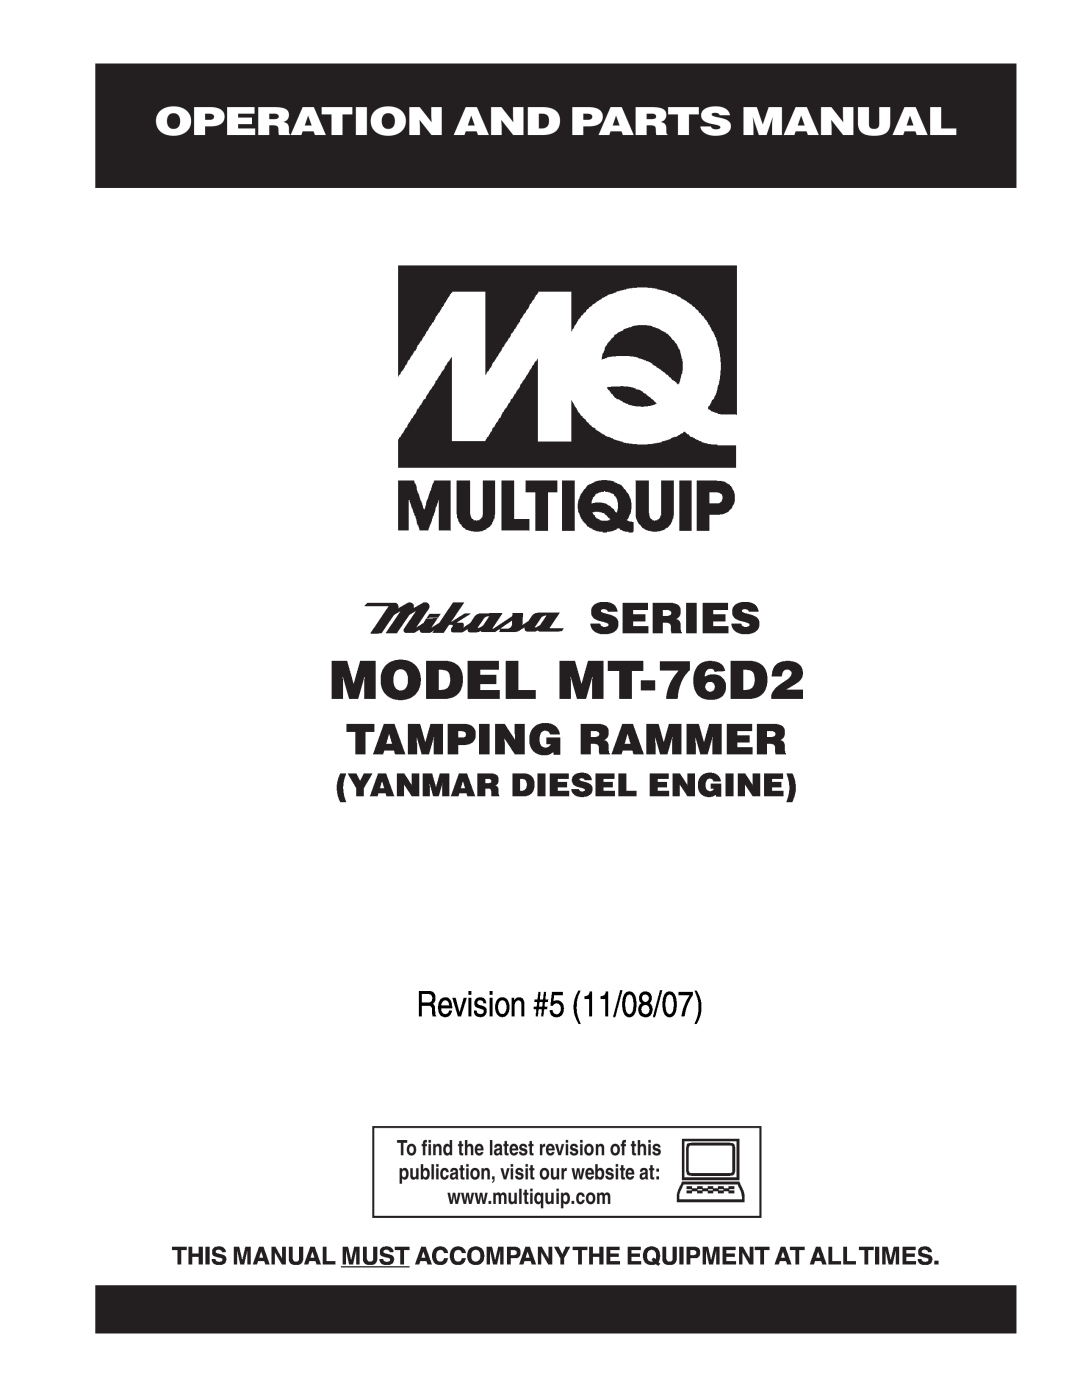 Multiquip manual Operation And Parts Manual, MODEL MT-76D2, Series, Tamping Rammer, Revision #5 11/08/07 